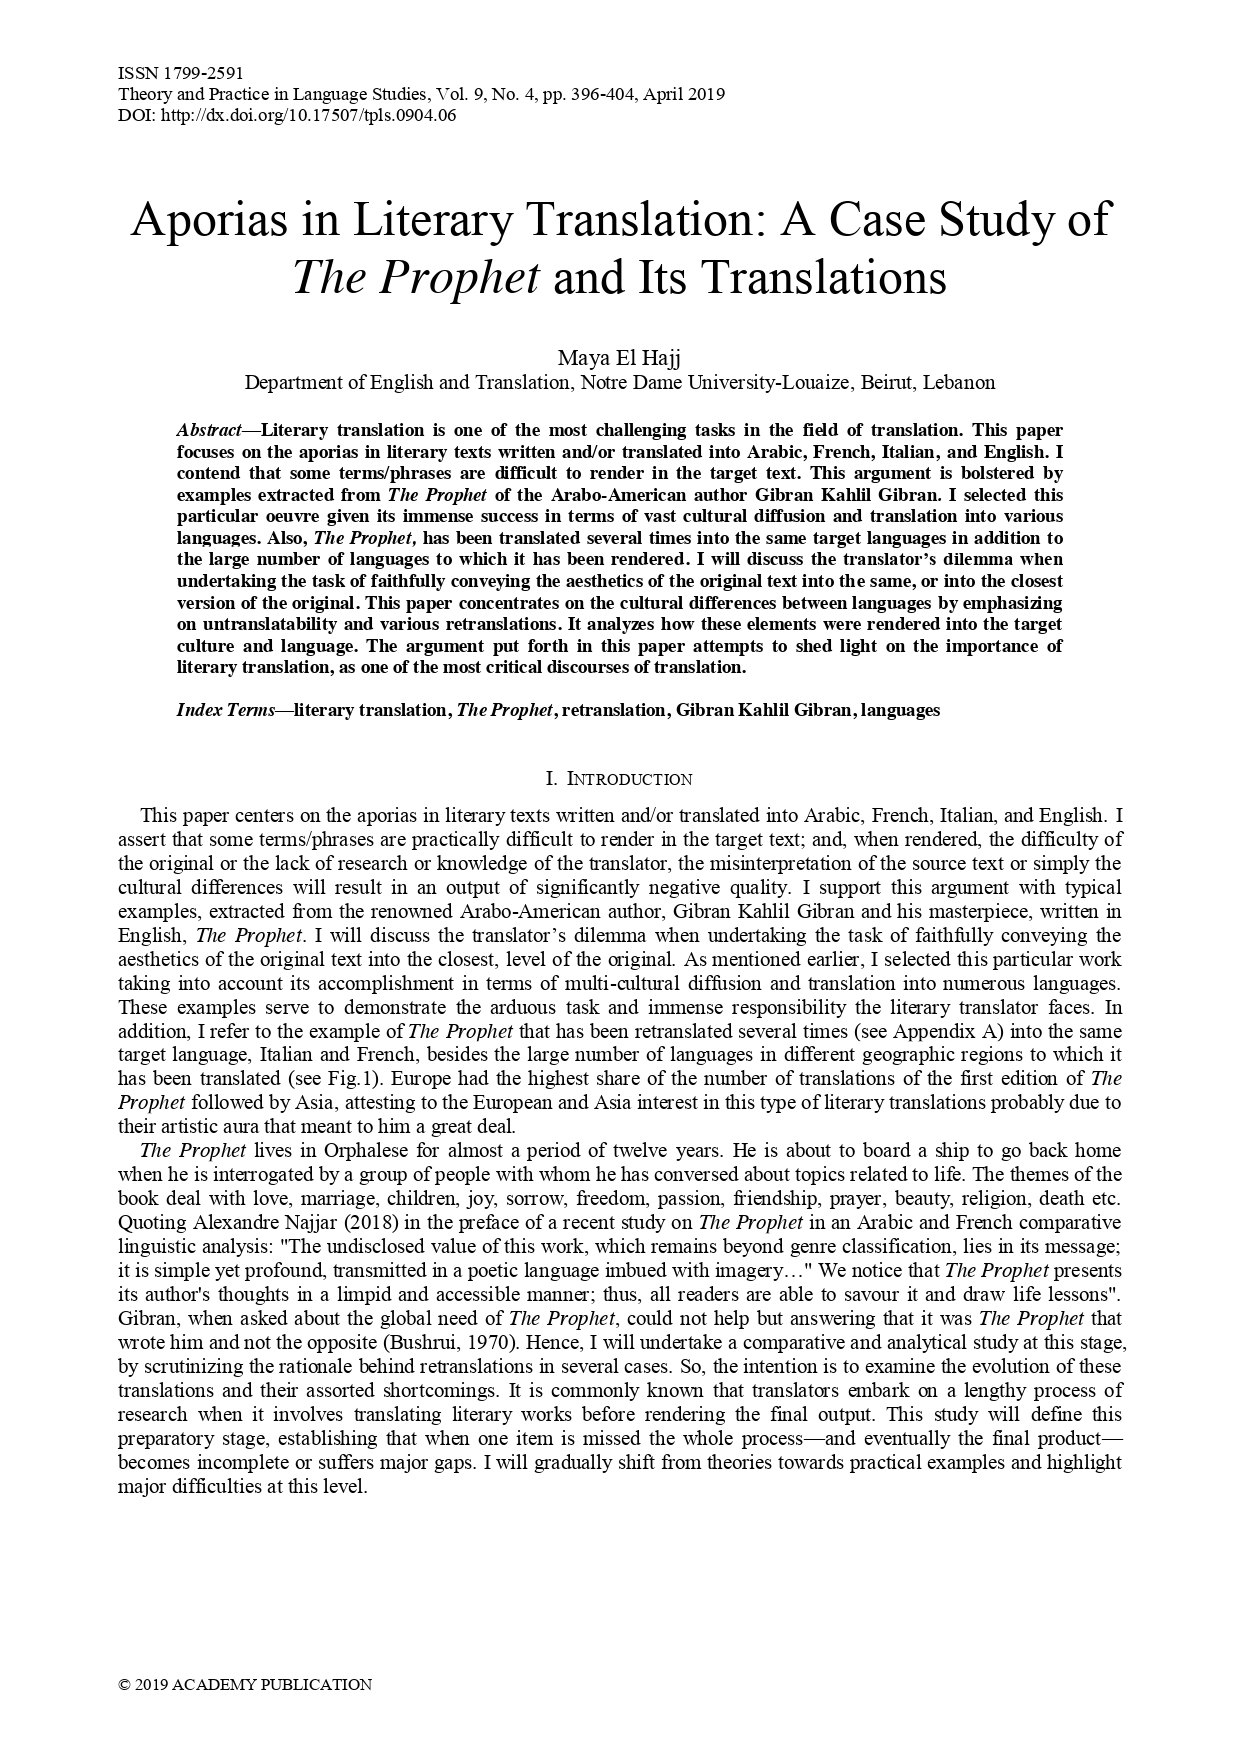 Maya El Hajj, Aporias in Literary Translation: A Case Study of "The Prophet" and Its Translations, "Theory and Practice in Language Studies", Vol. 9, No. 4, April 2019